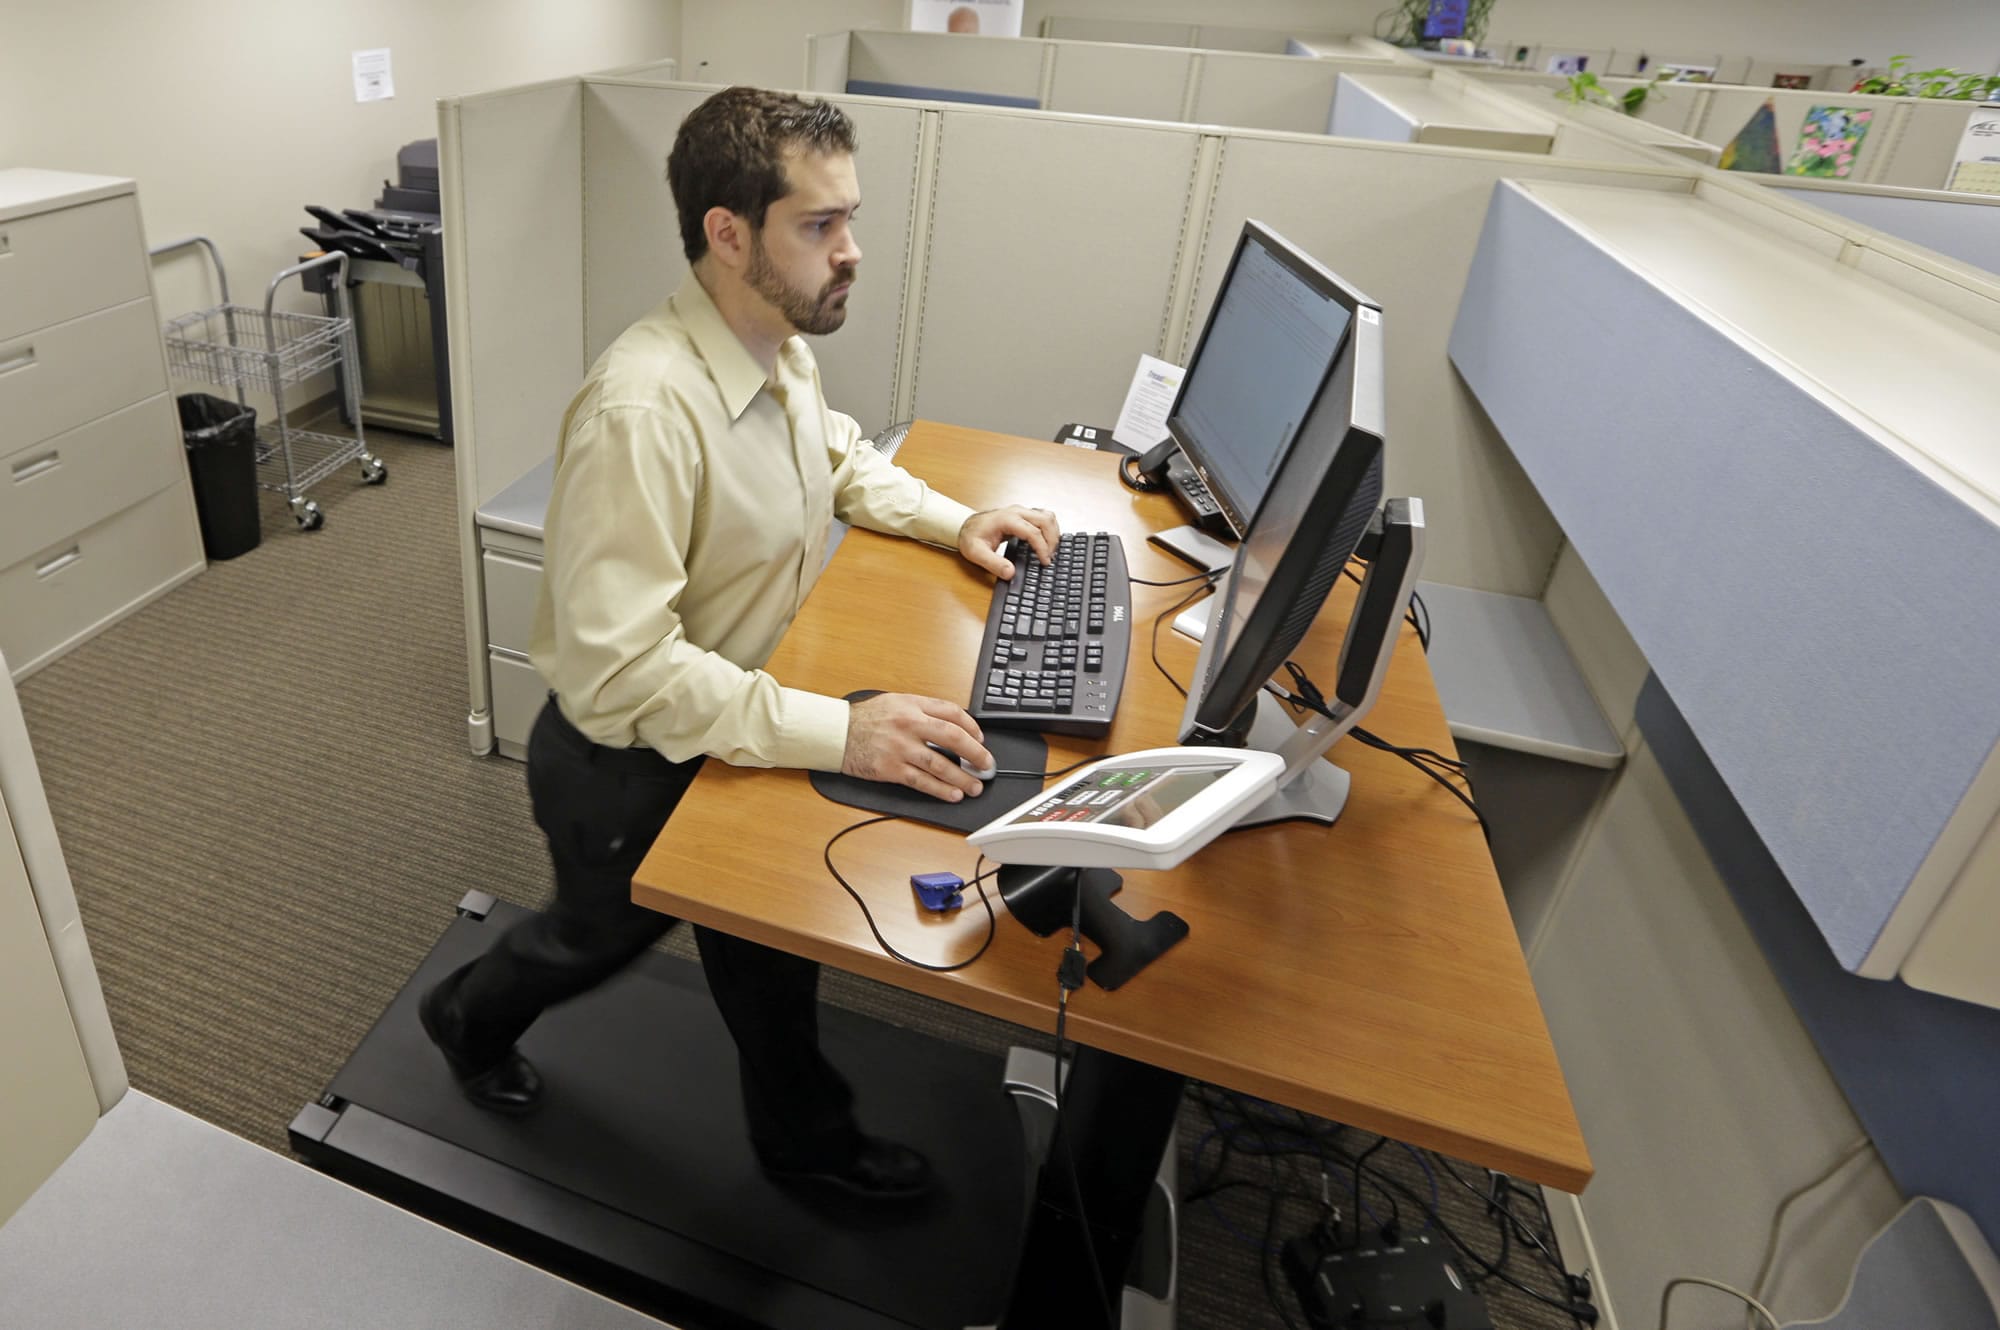 Josh Baldonado, an administrative assistant at Brown &amp; Brown Insurance, works at a treadmill desk in the firm's offices in Carmel, Ind., in August.